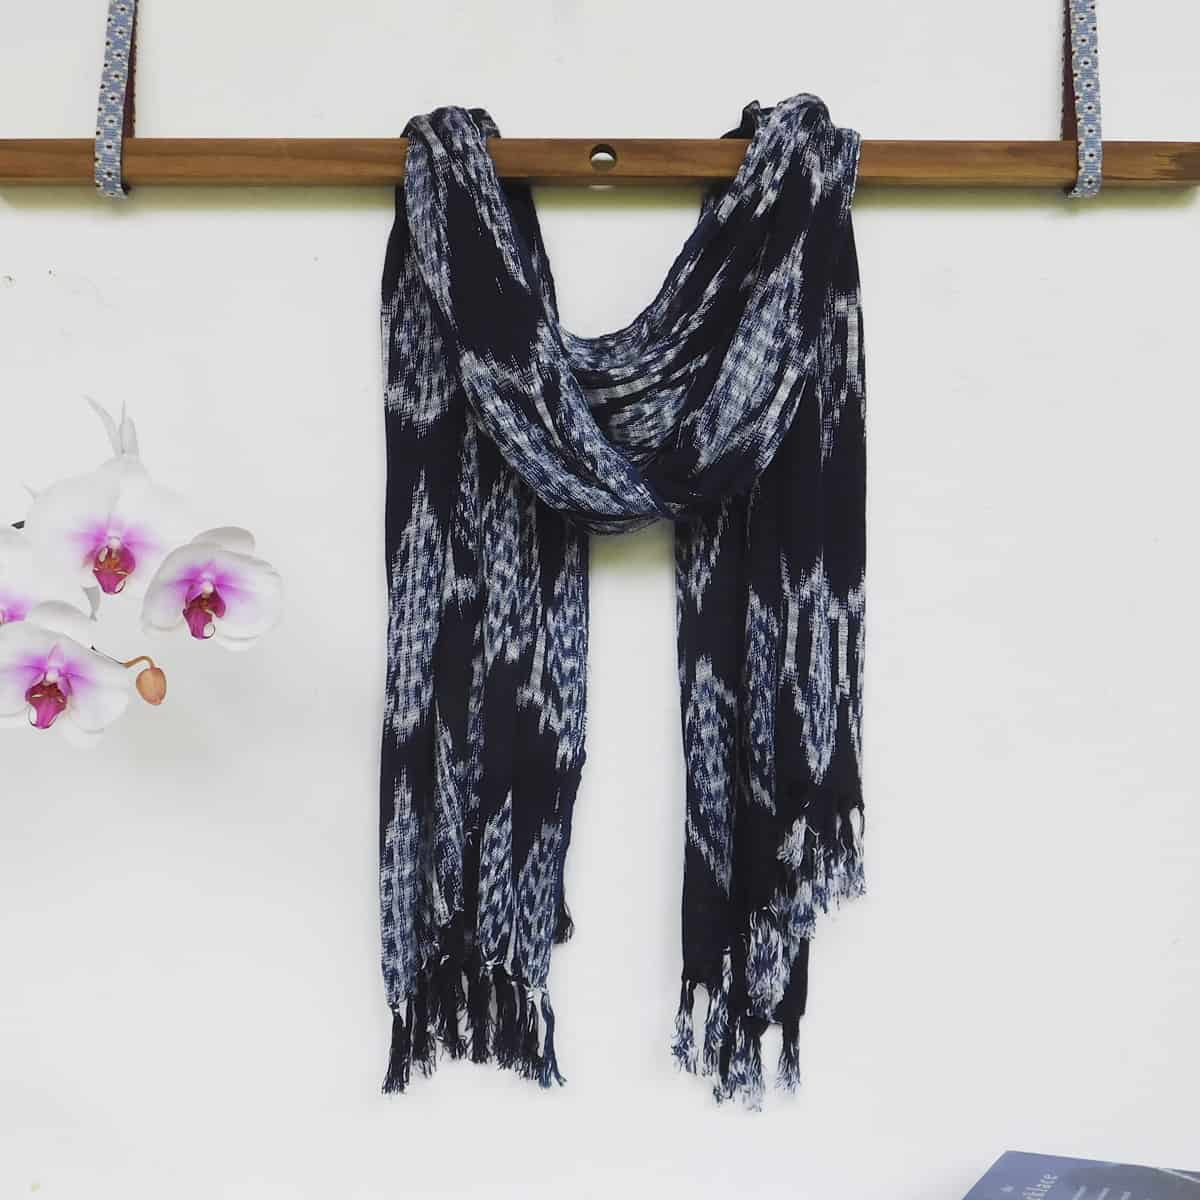 a navy blue and white ikat scarf is draped over a hanging wooden beam next to a pink and white orchid.